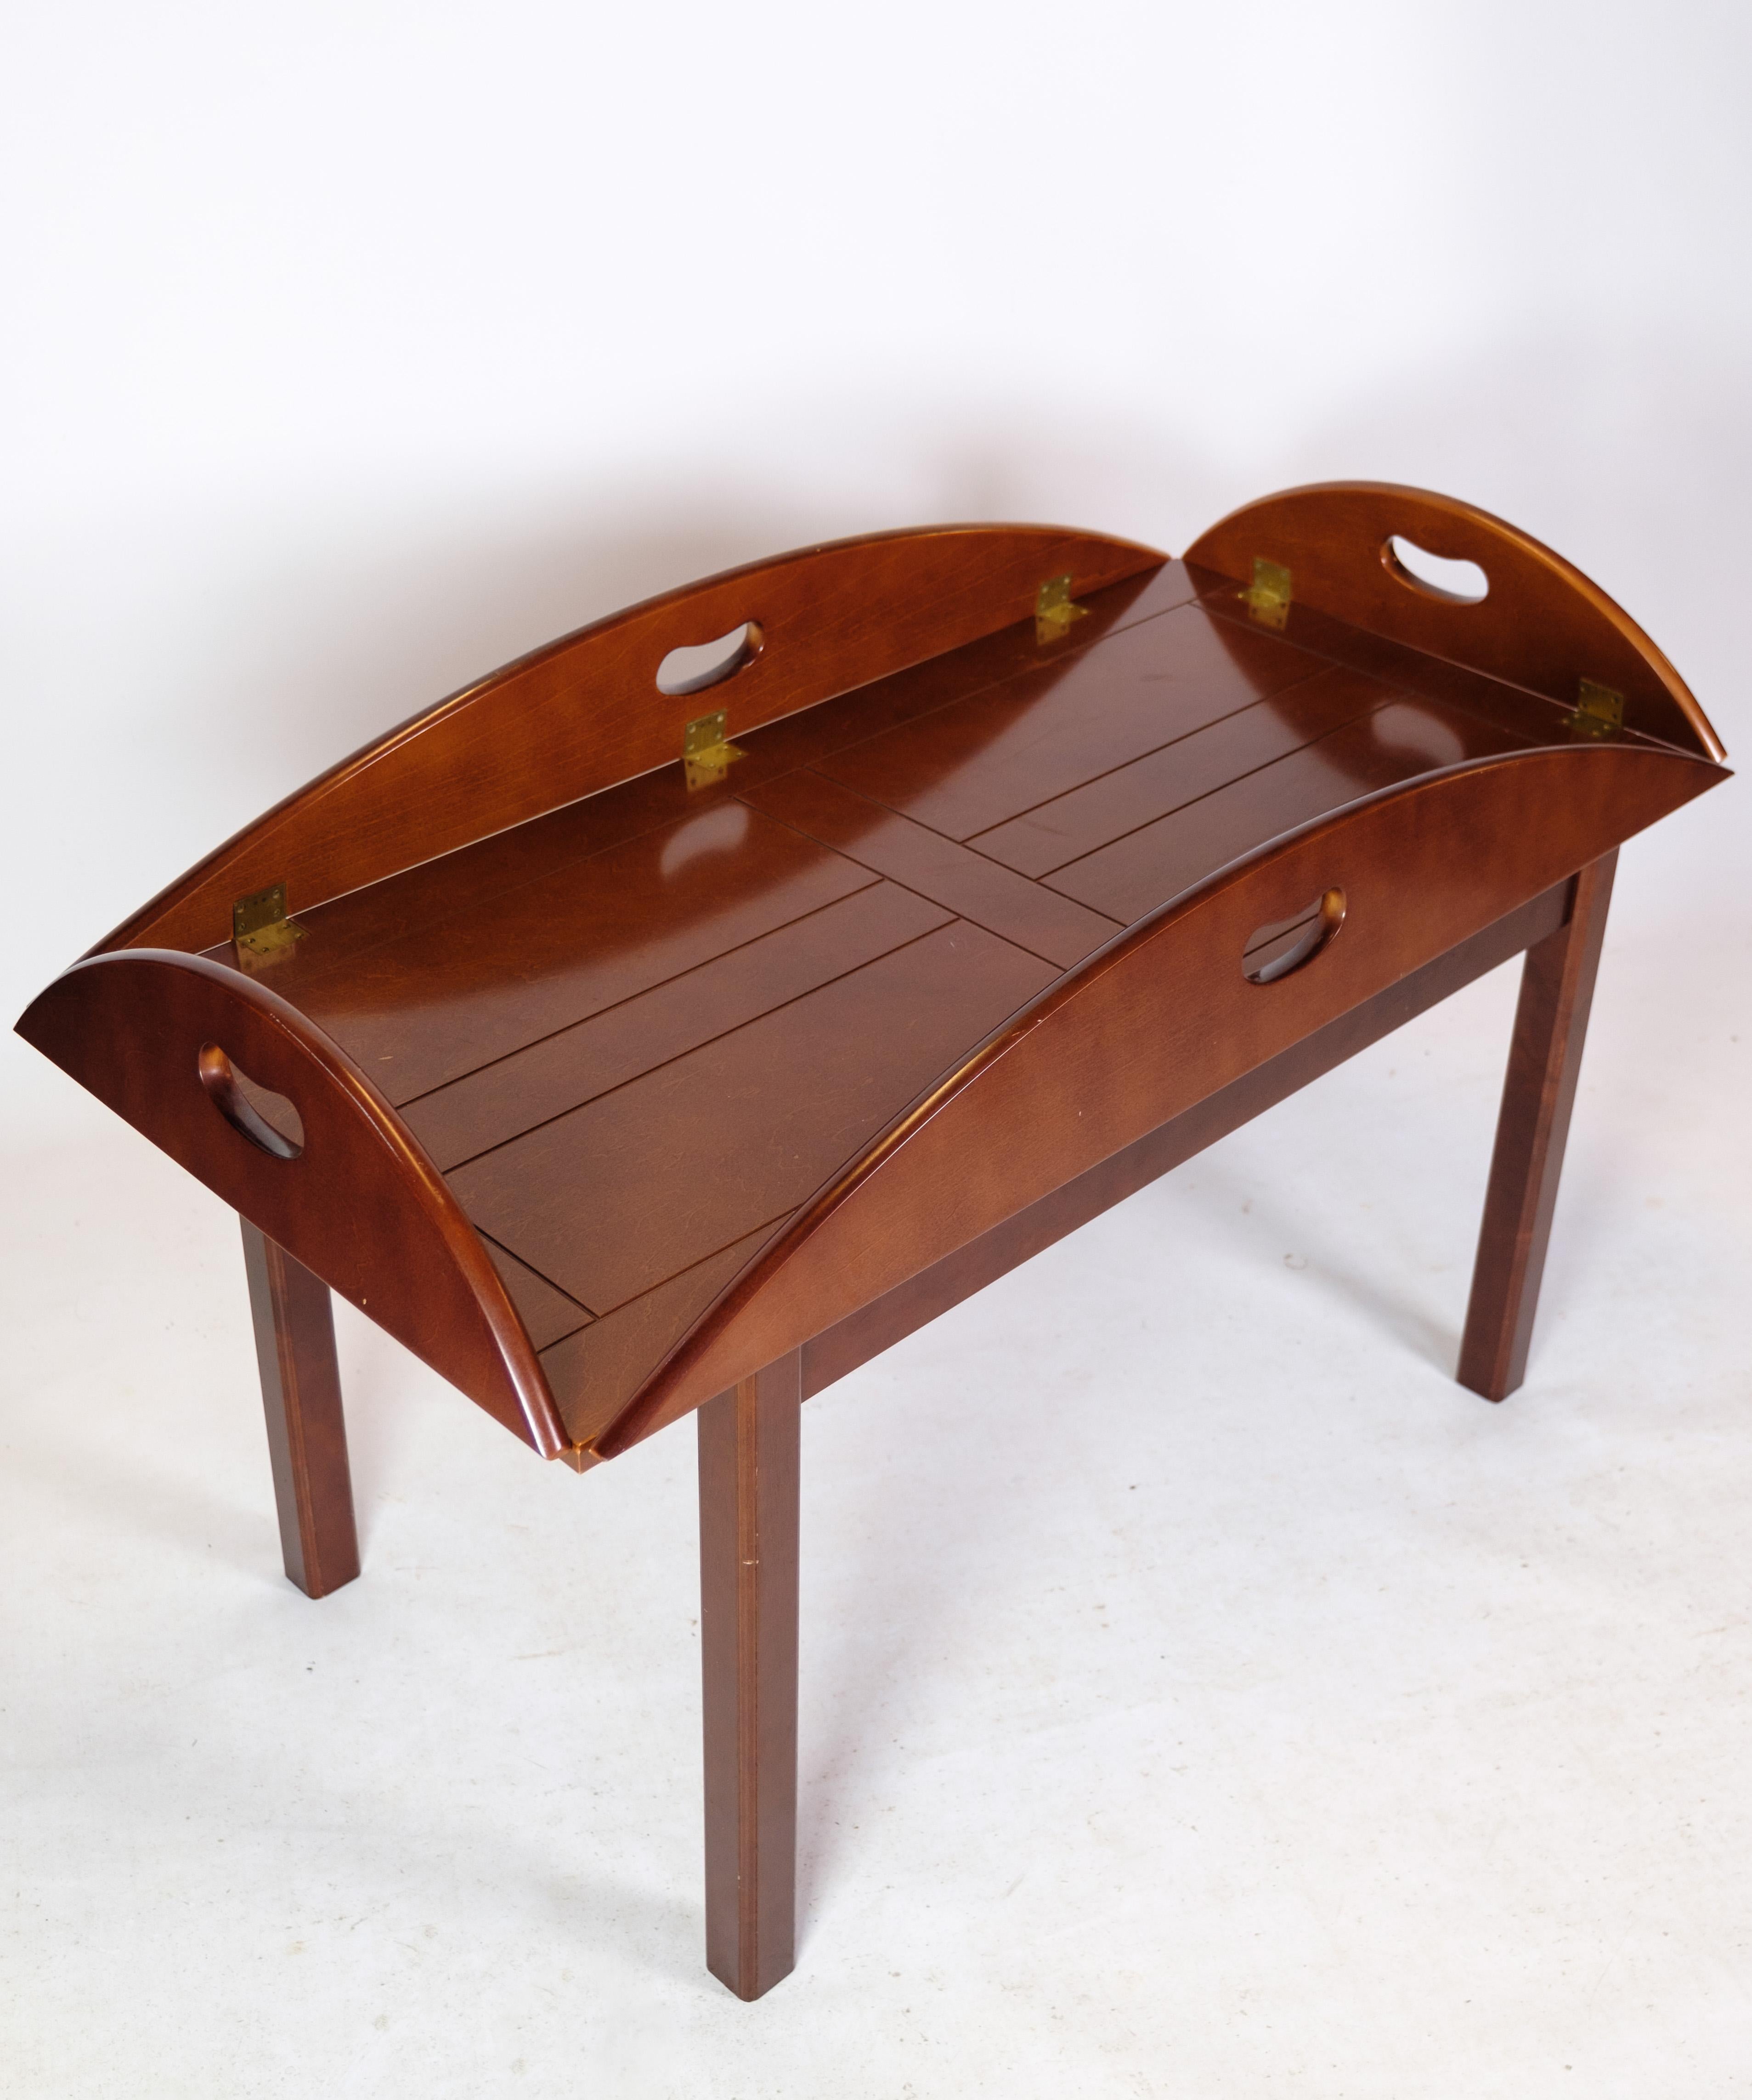 Danish Coffee Table In Polished Mahogany with Brass fittings from the 1940s For Sale